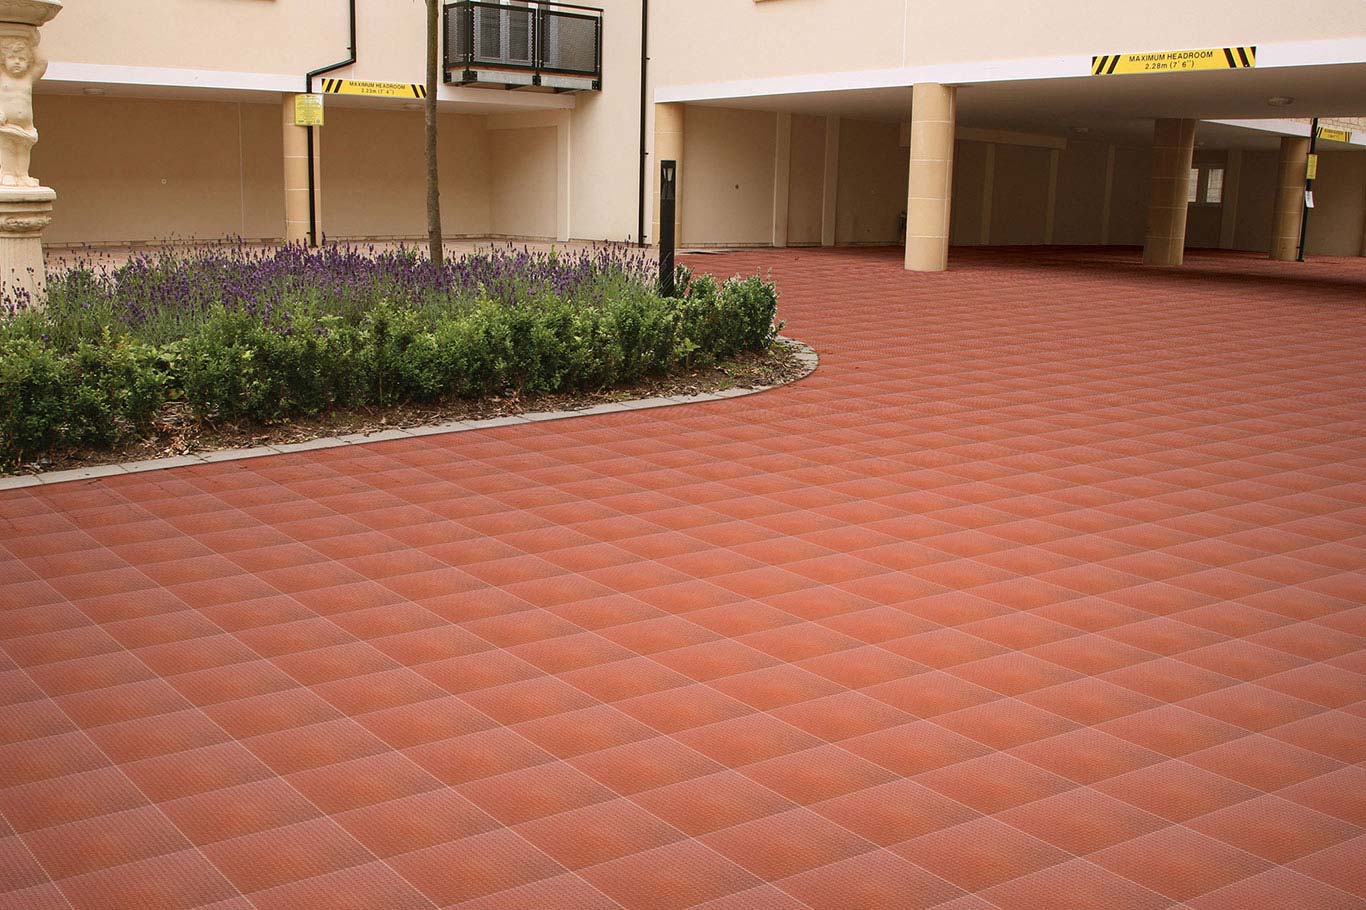 400 x 400 Parking Tiles Manufacturers In India